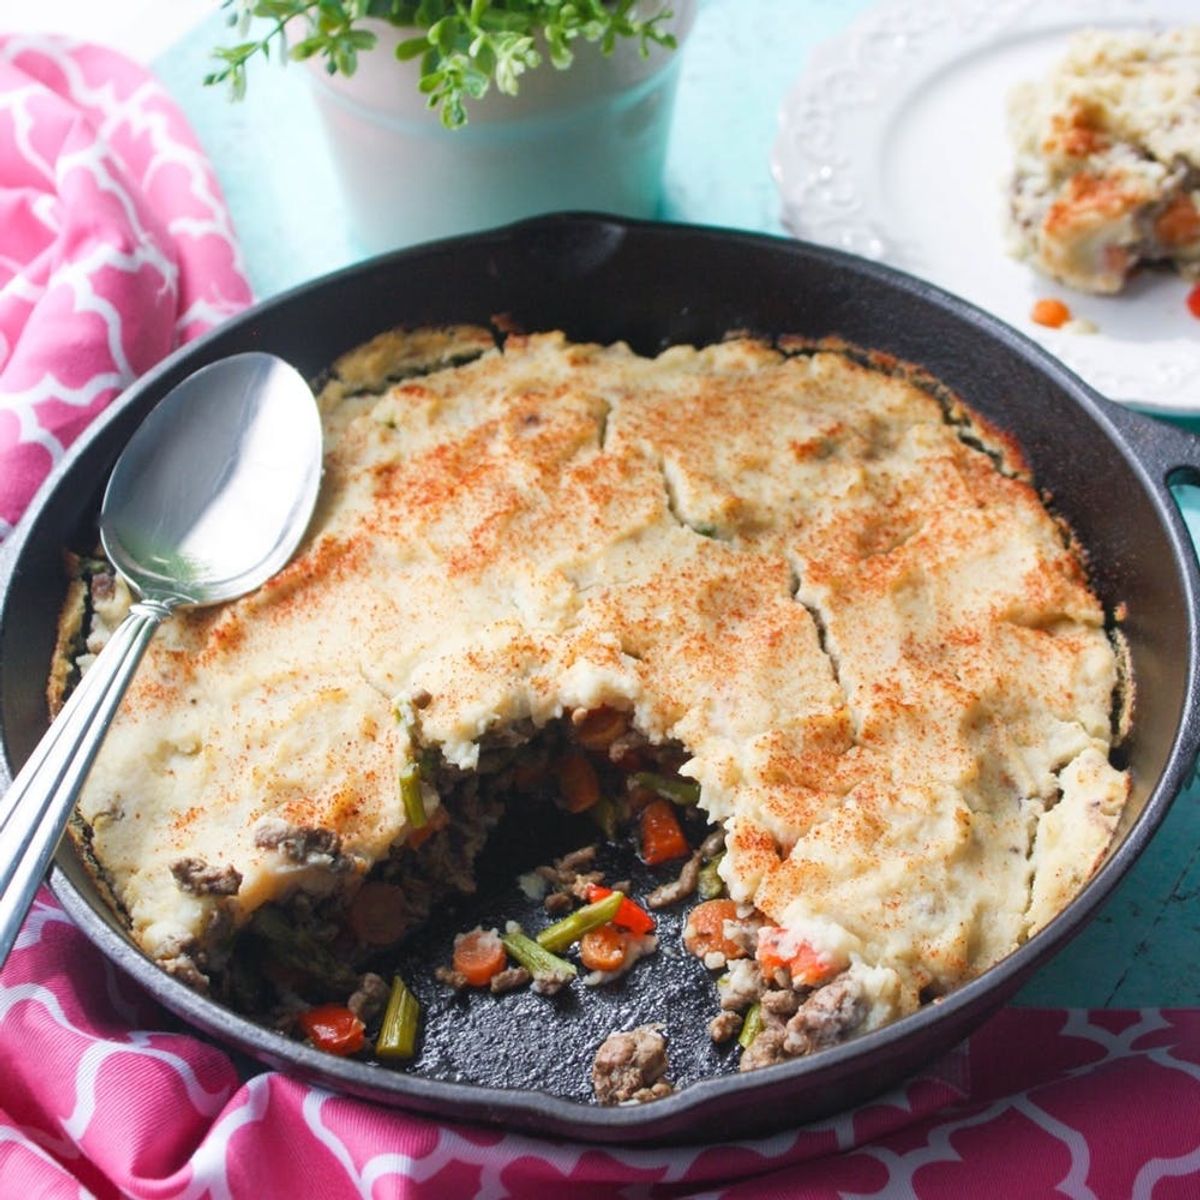 This Shepherd’s Pie Recipe Is Just Like Mom’s (But Perfectly Paleo)